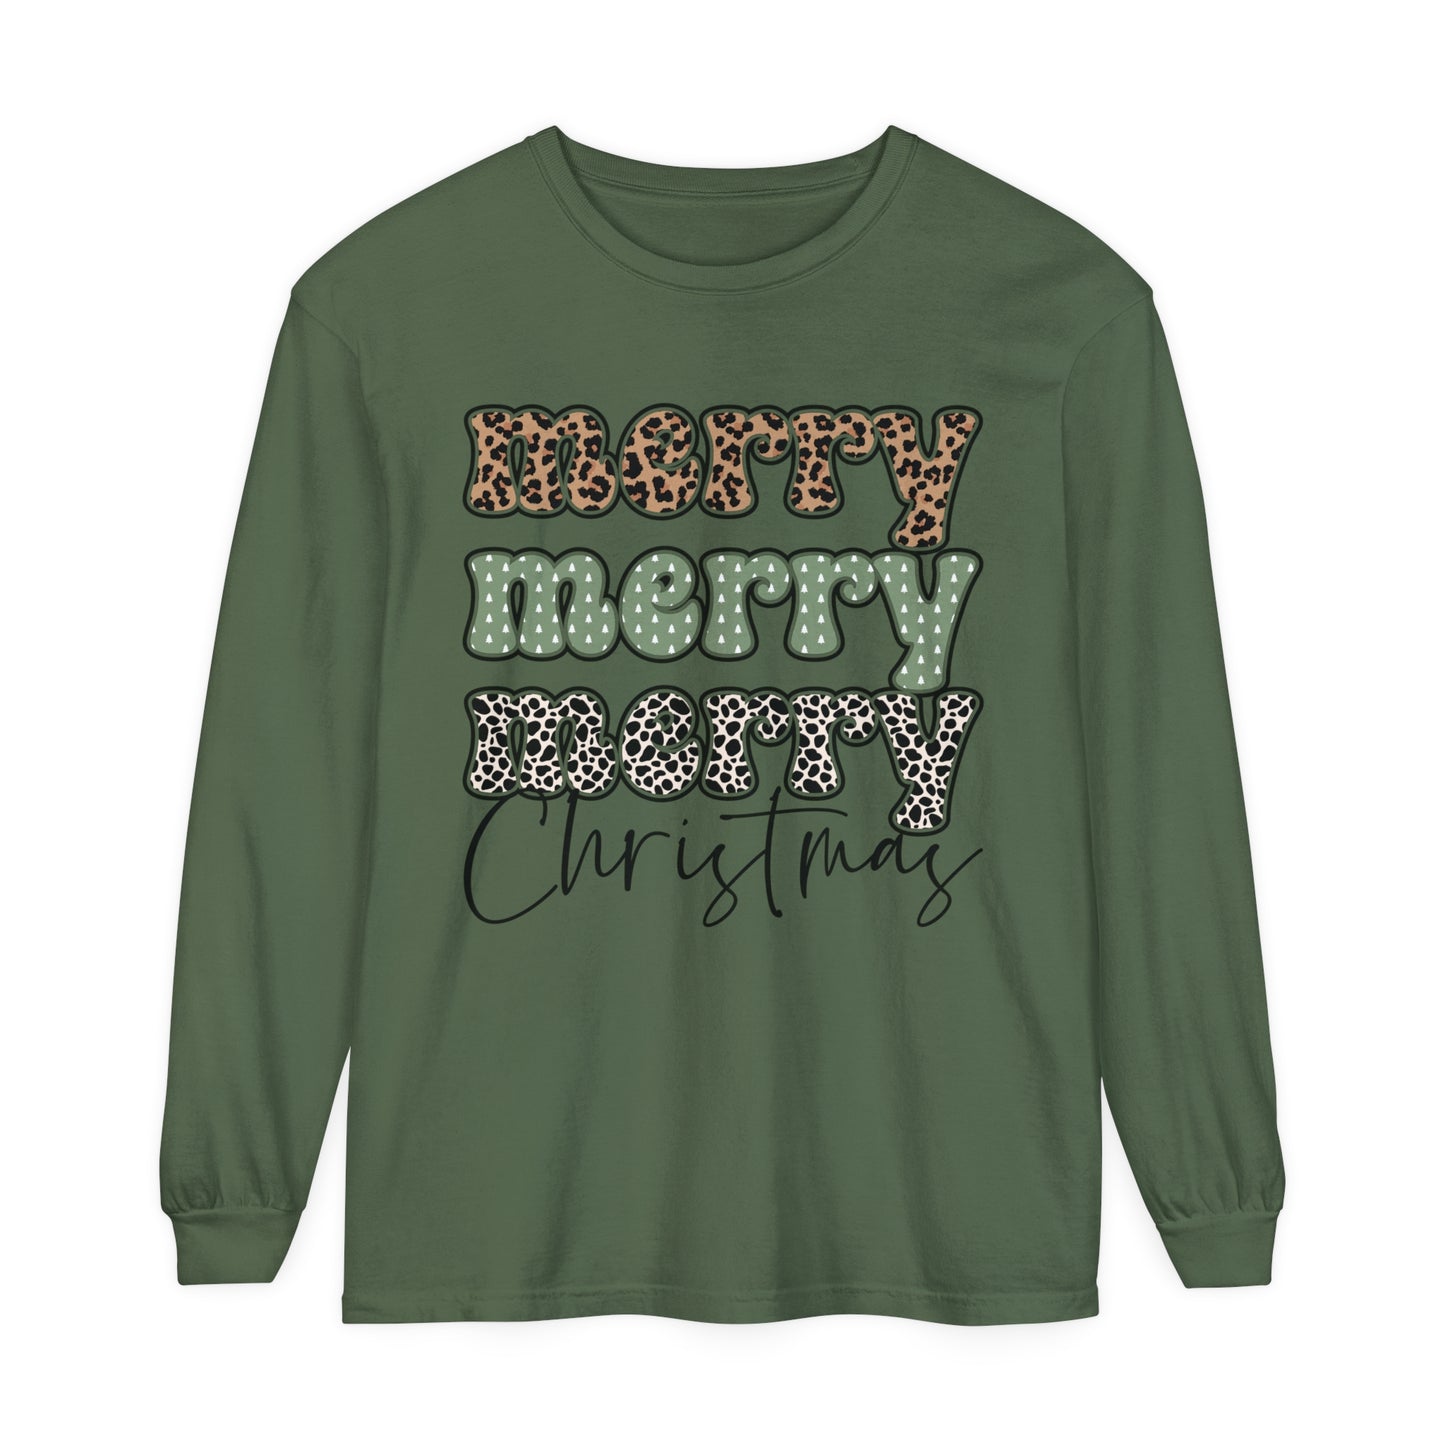 Merry Merry Merry Christmas Women's Holiday Loose Long Sleeve T-Shirt